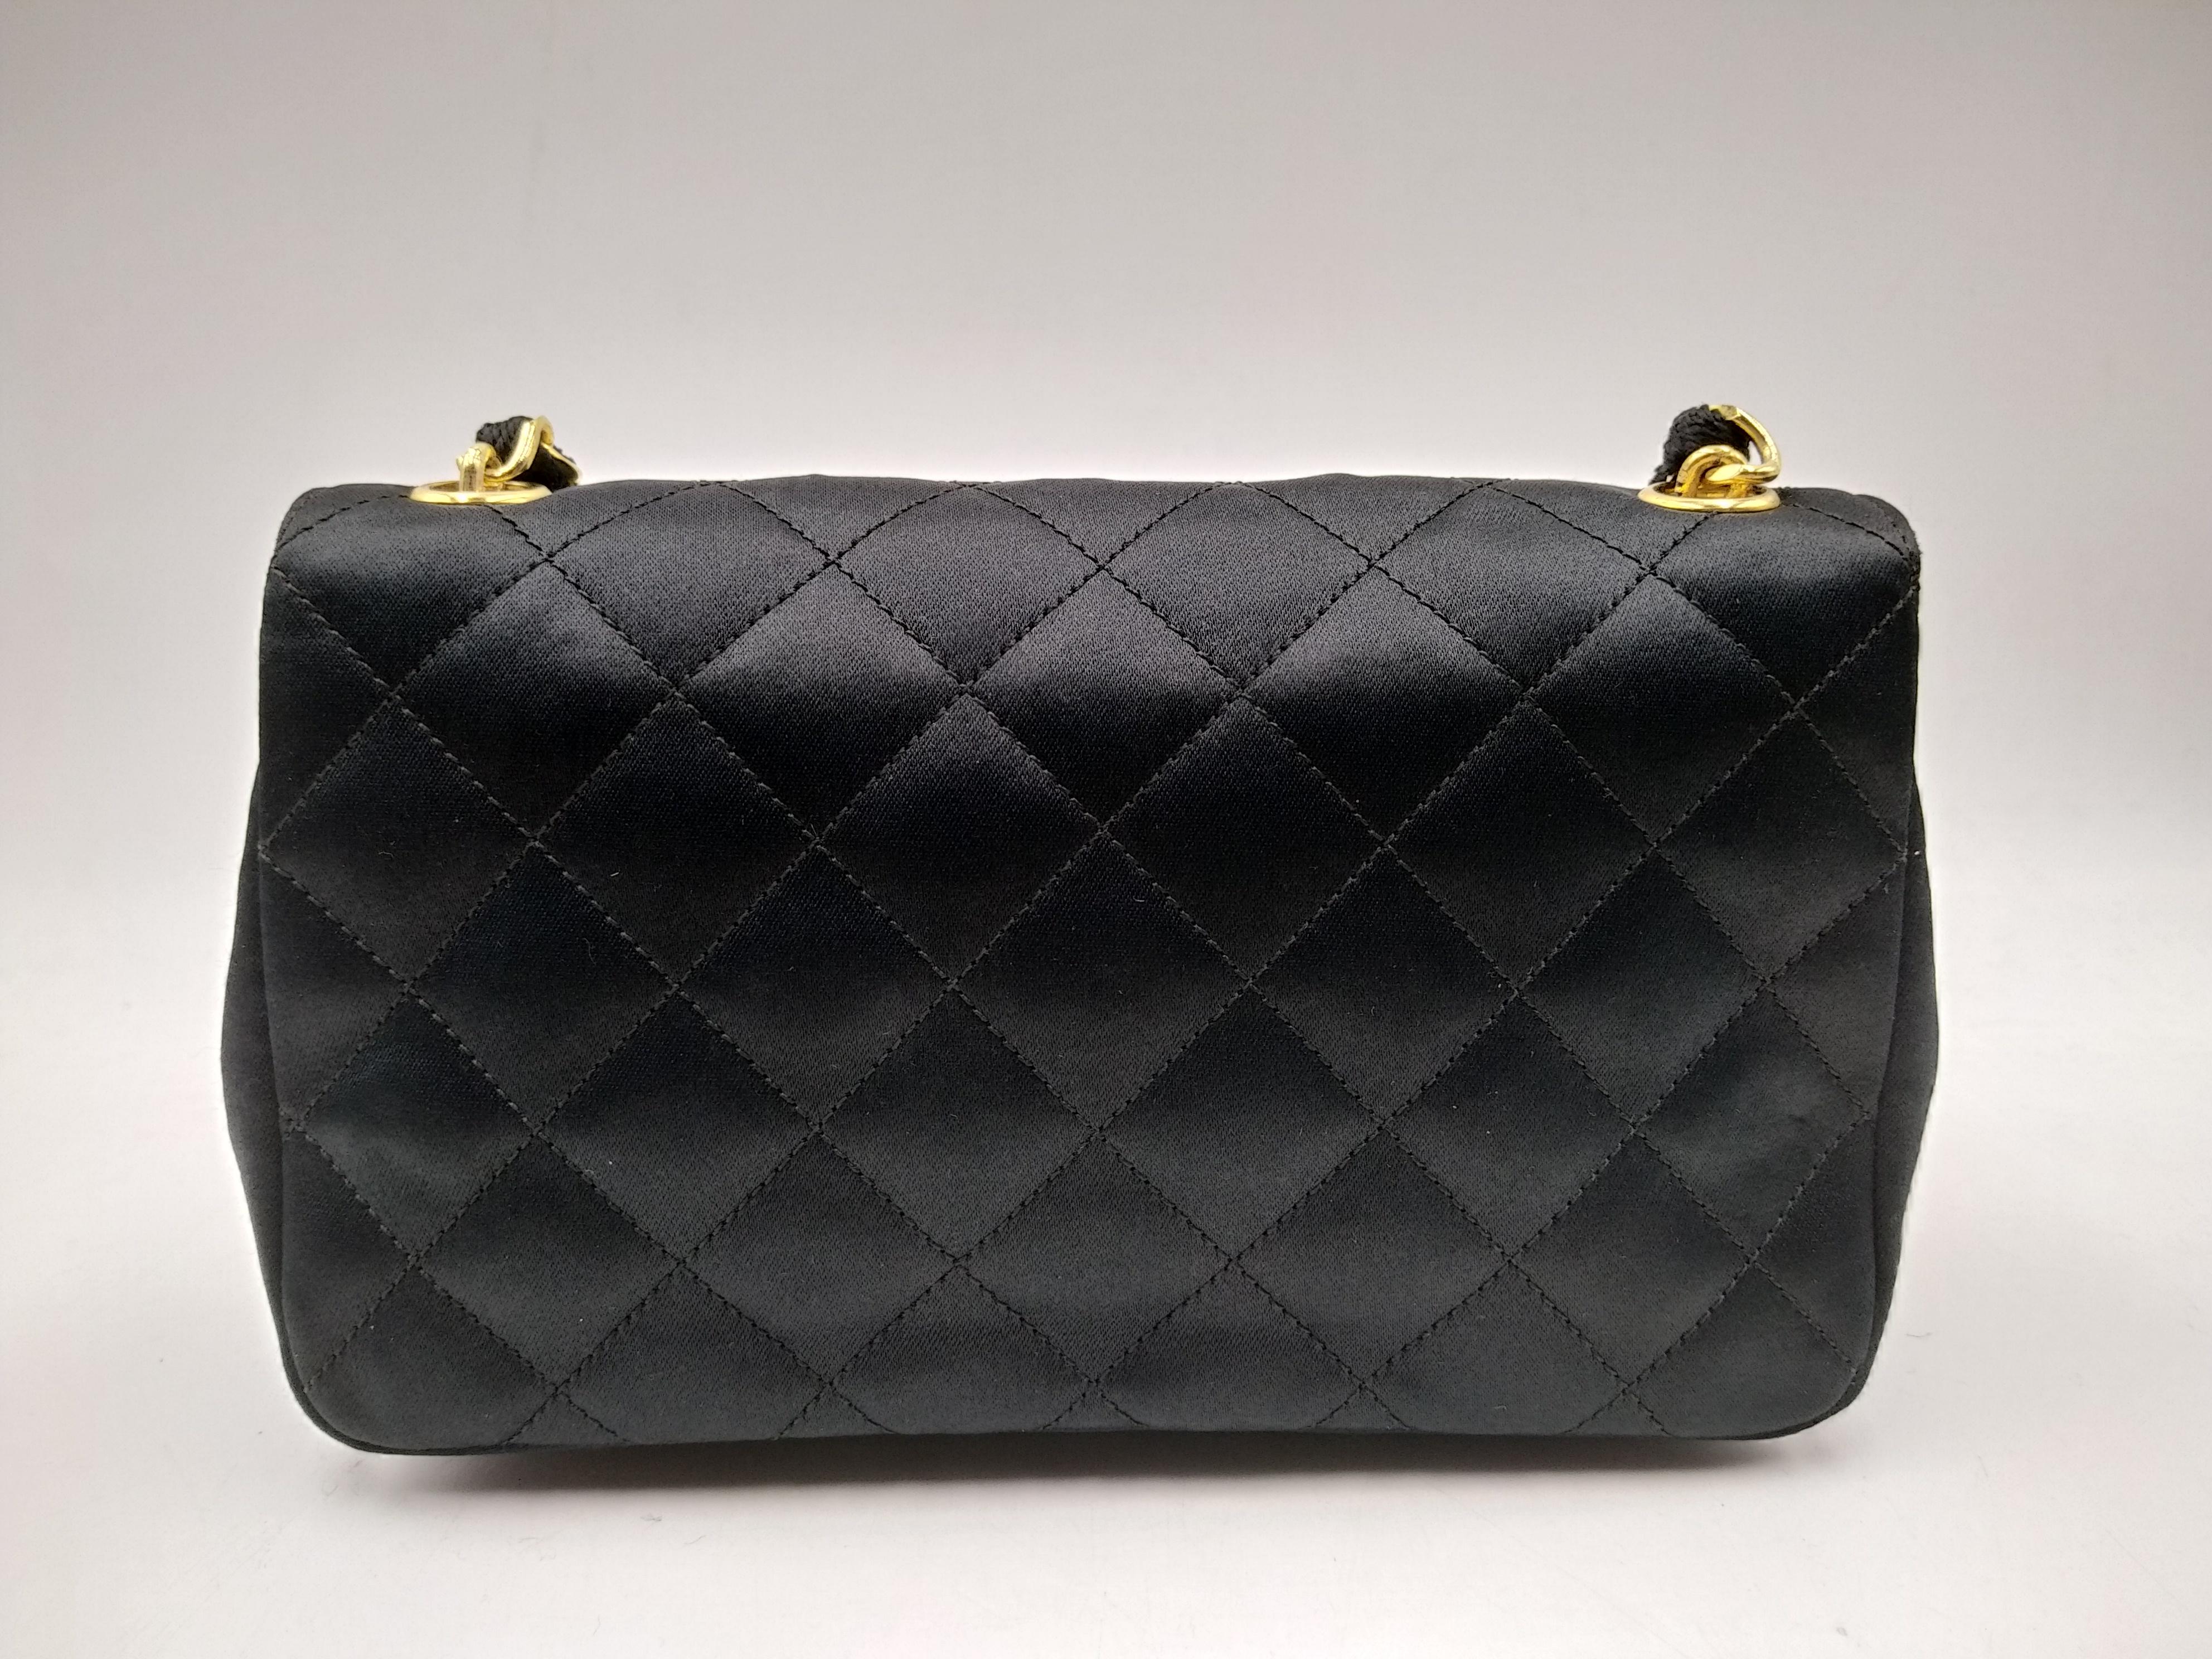 Women's or Men's Chanel Black Quilted Satin Mini Flap Bag with Gold Hardware For Sale